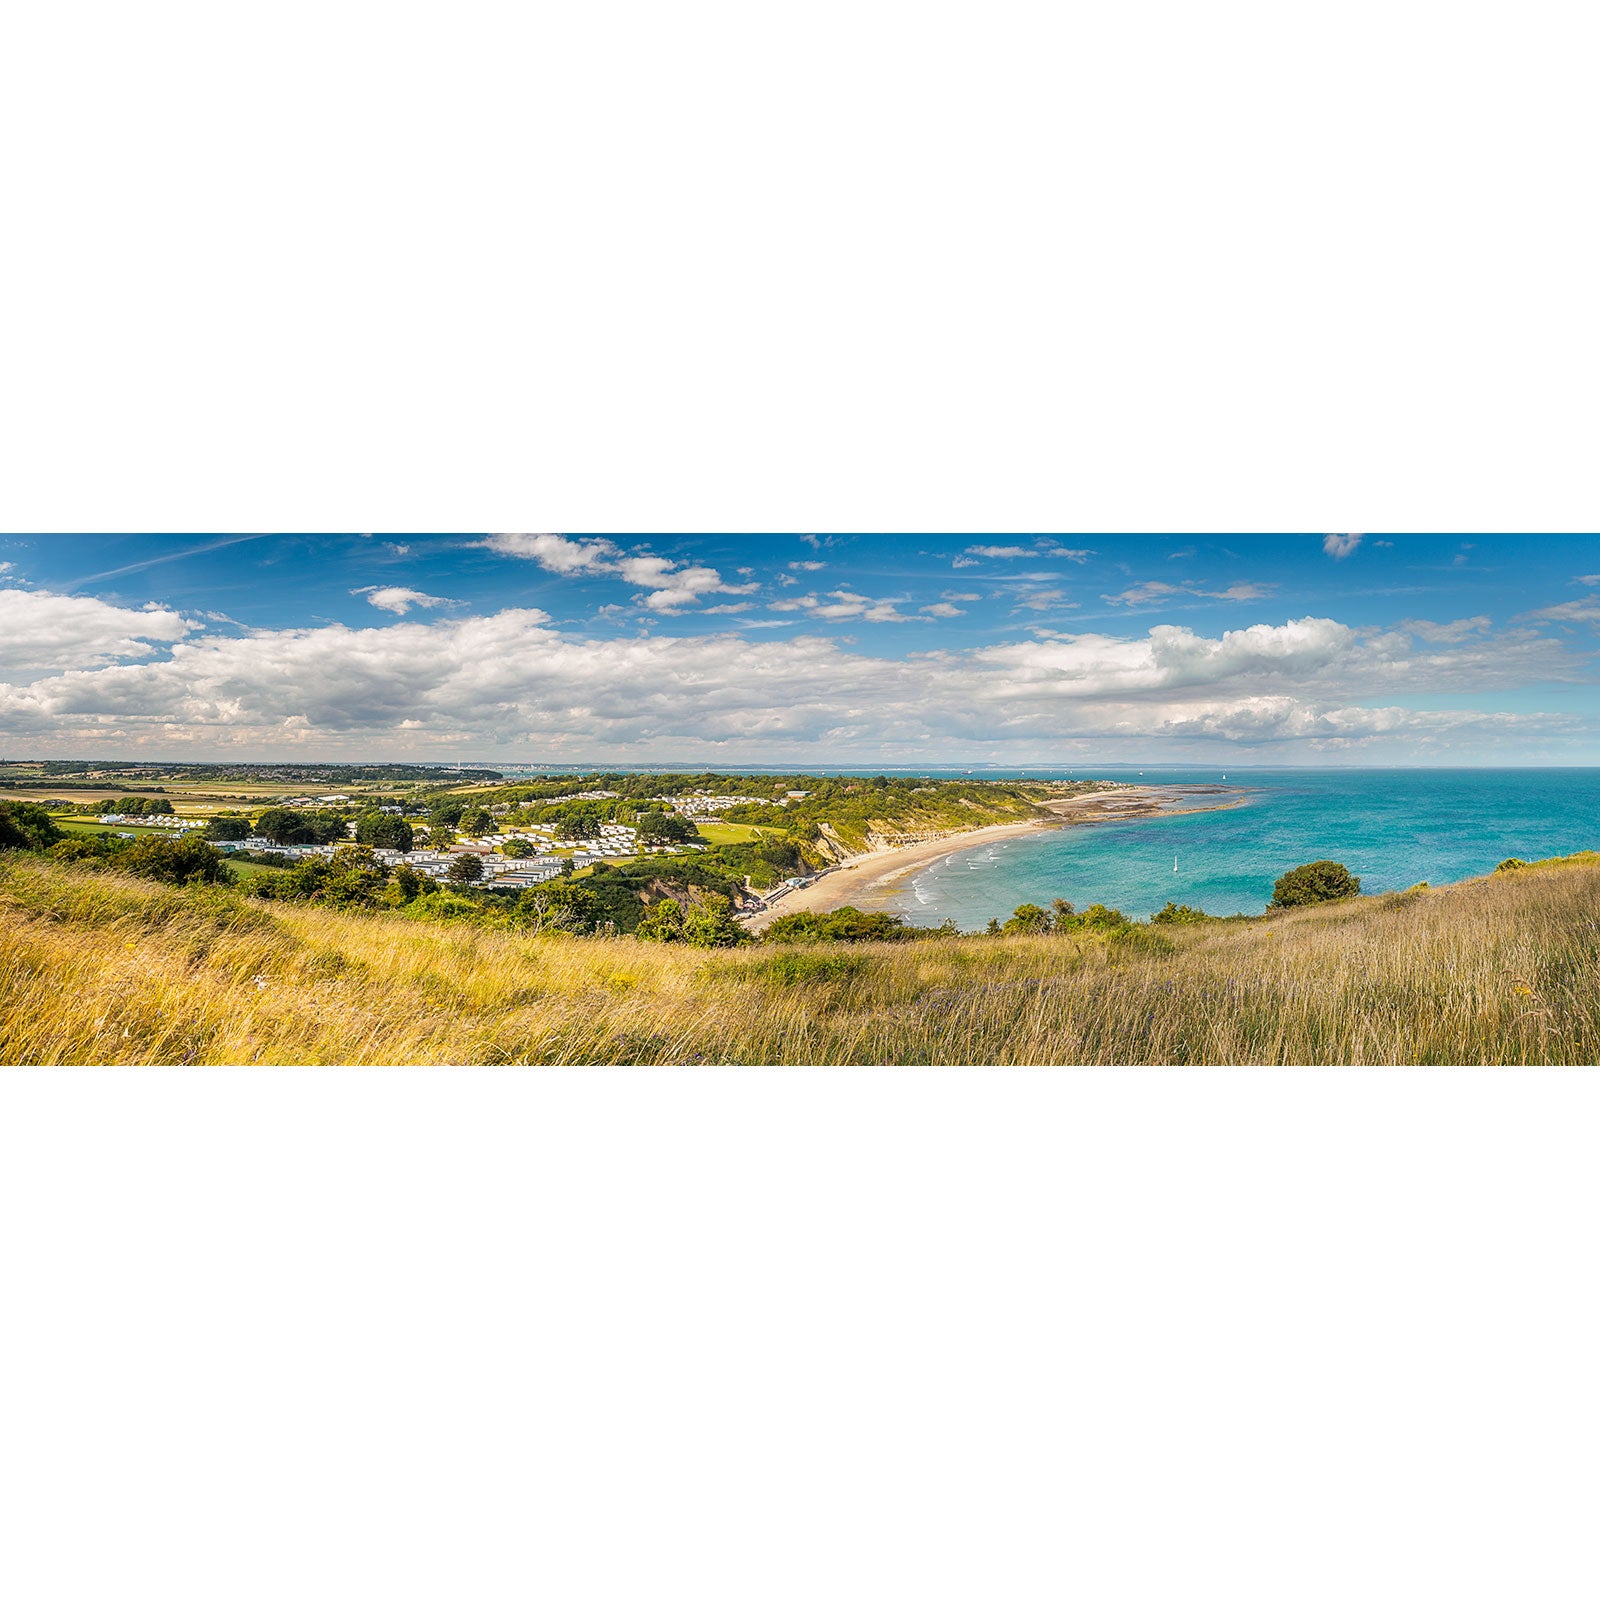 Panoramic view of Whitecliff Bay, a coastal village with a beachfront on the Isle of Wight, seen from a grassy hilltop under a partly cloudy sky, captured by Available Light Photography.